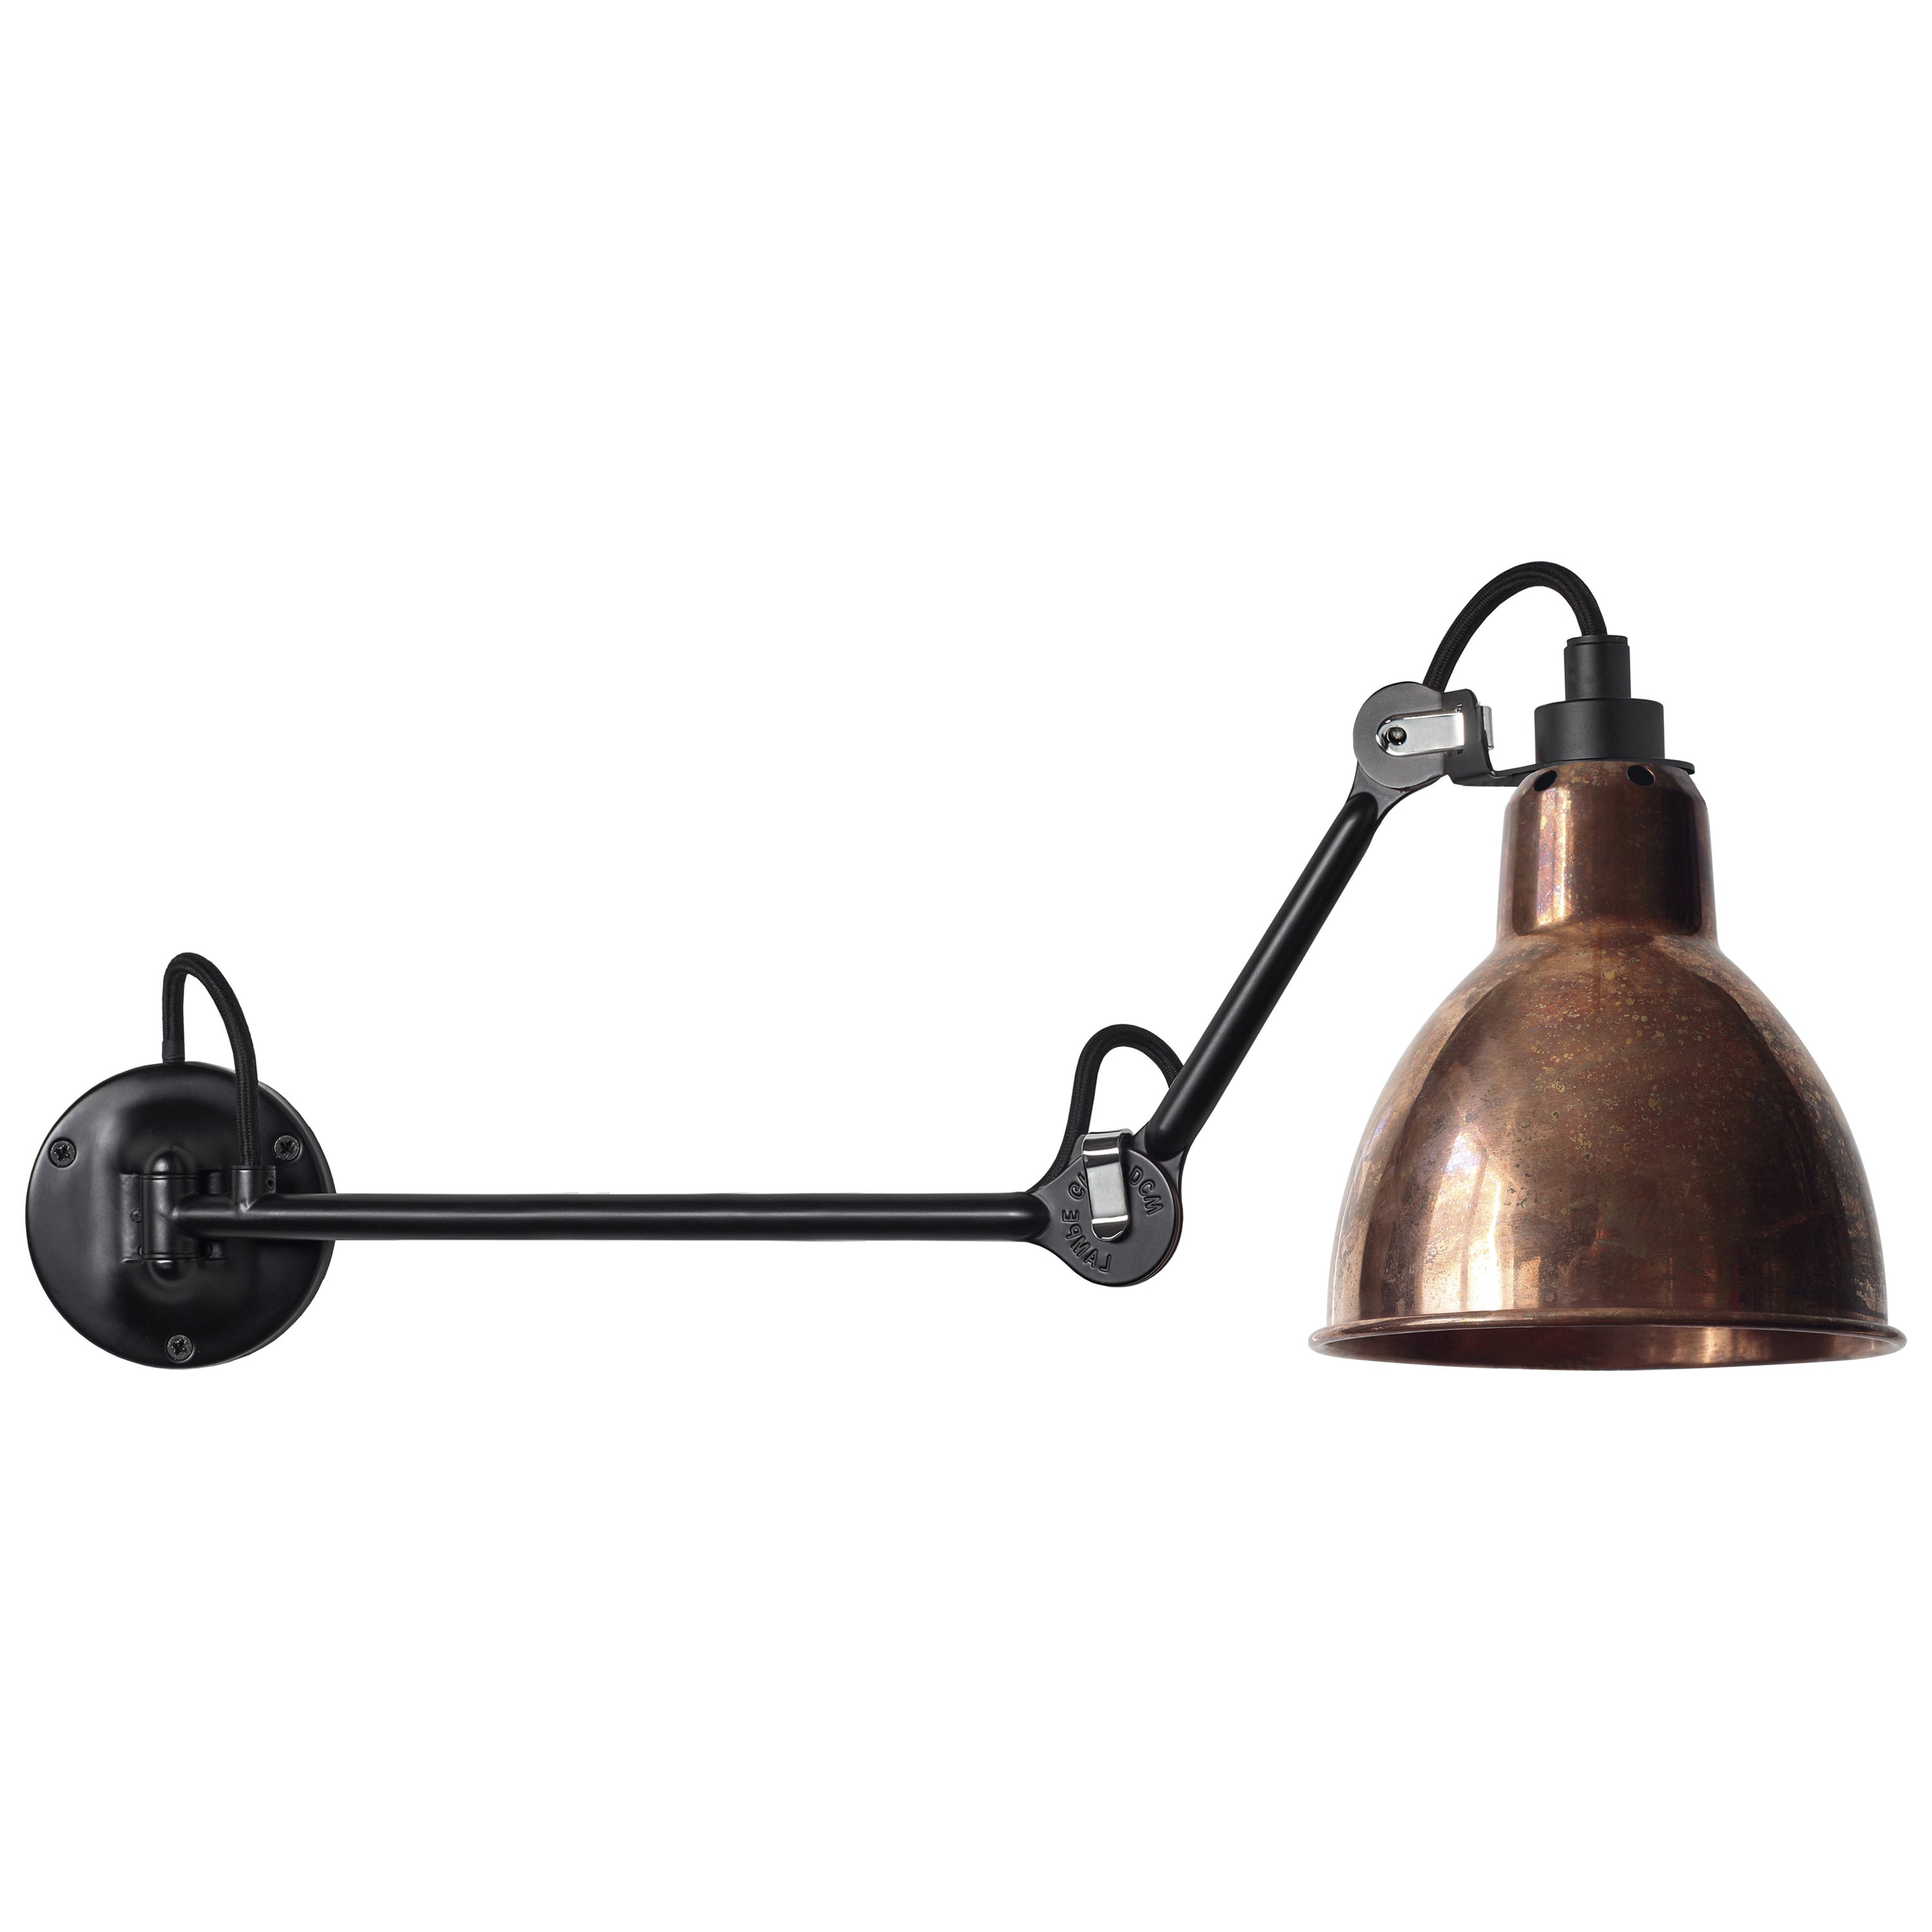 DCW Editions La Lampe Gras N°204 L40 Wall Lamp in Black Arm and Raw Copper Shade For Sale